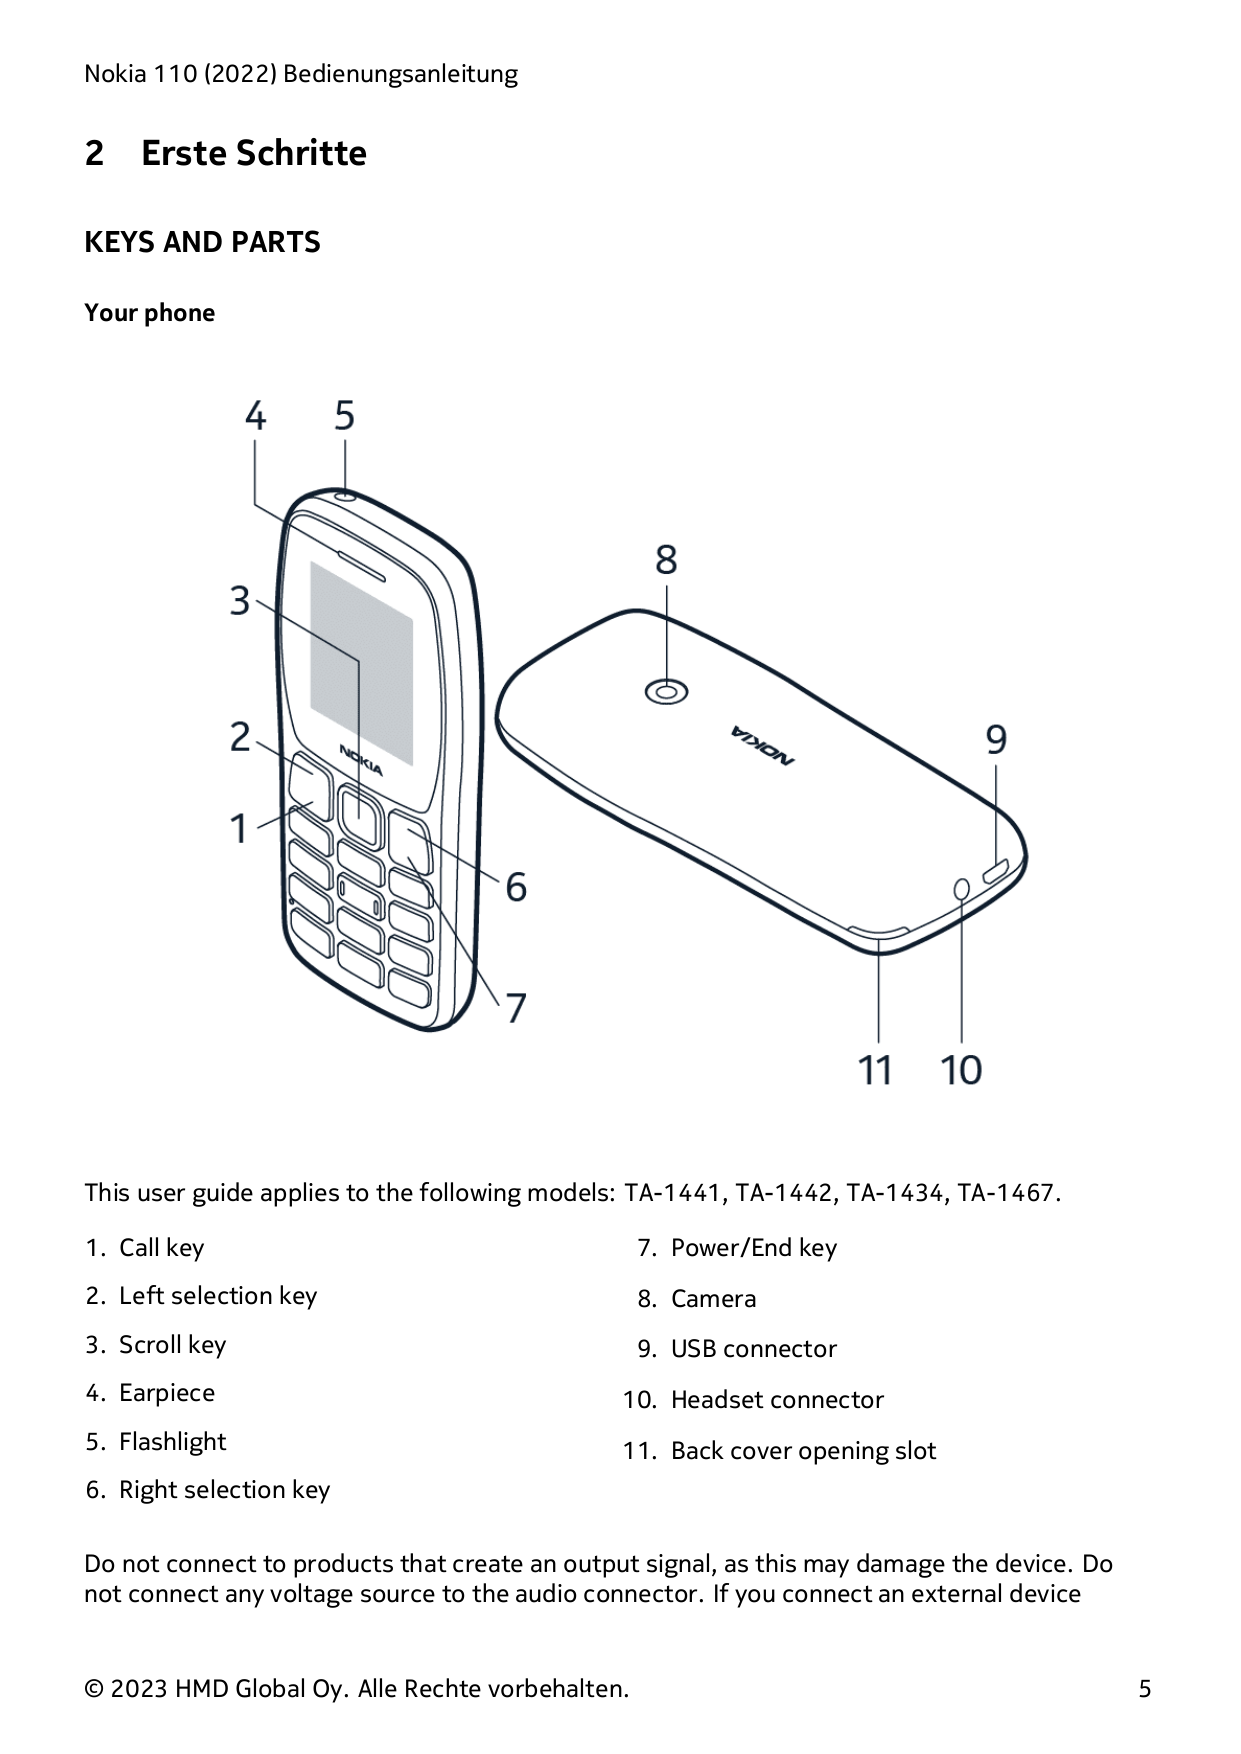 Nokia 110 (2022) Bedienungsanleitung2Erste SchritteKEYS AND PARTSYour phoneThis user guide applies to the following models: TA-1